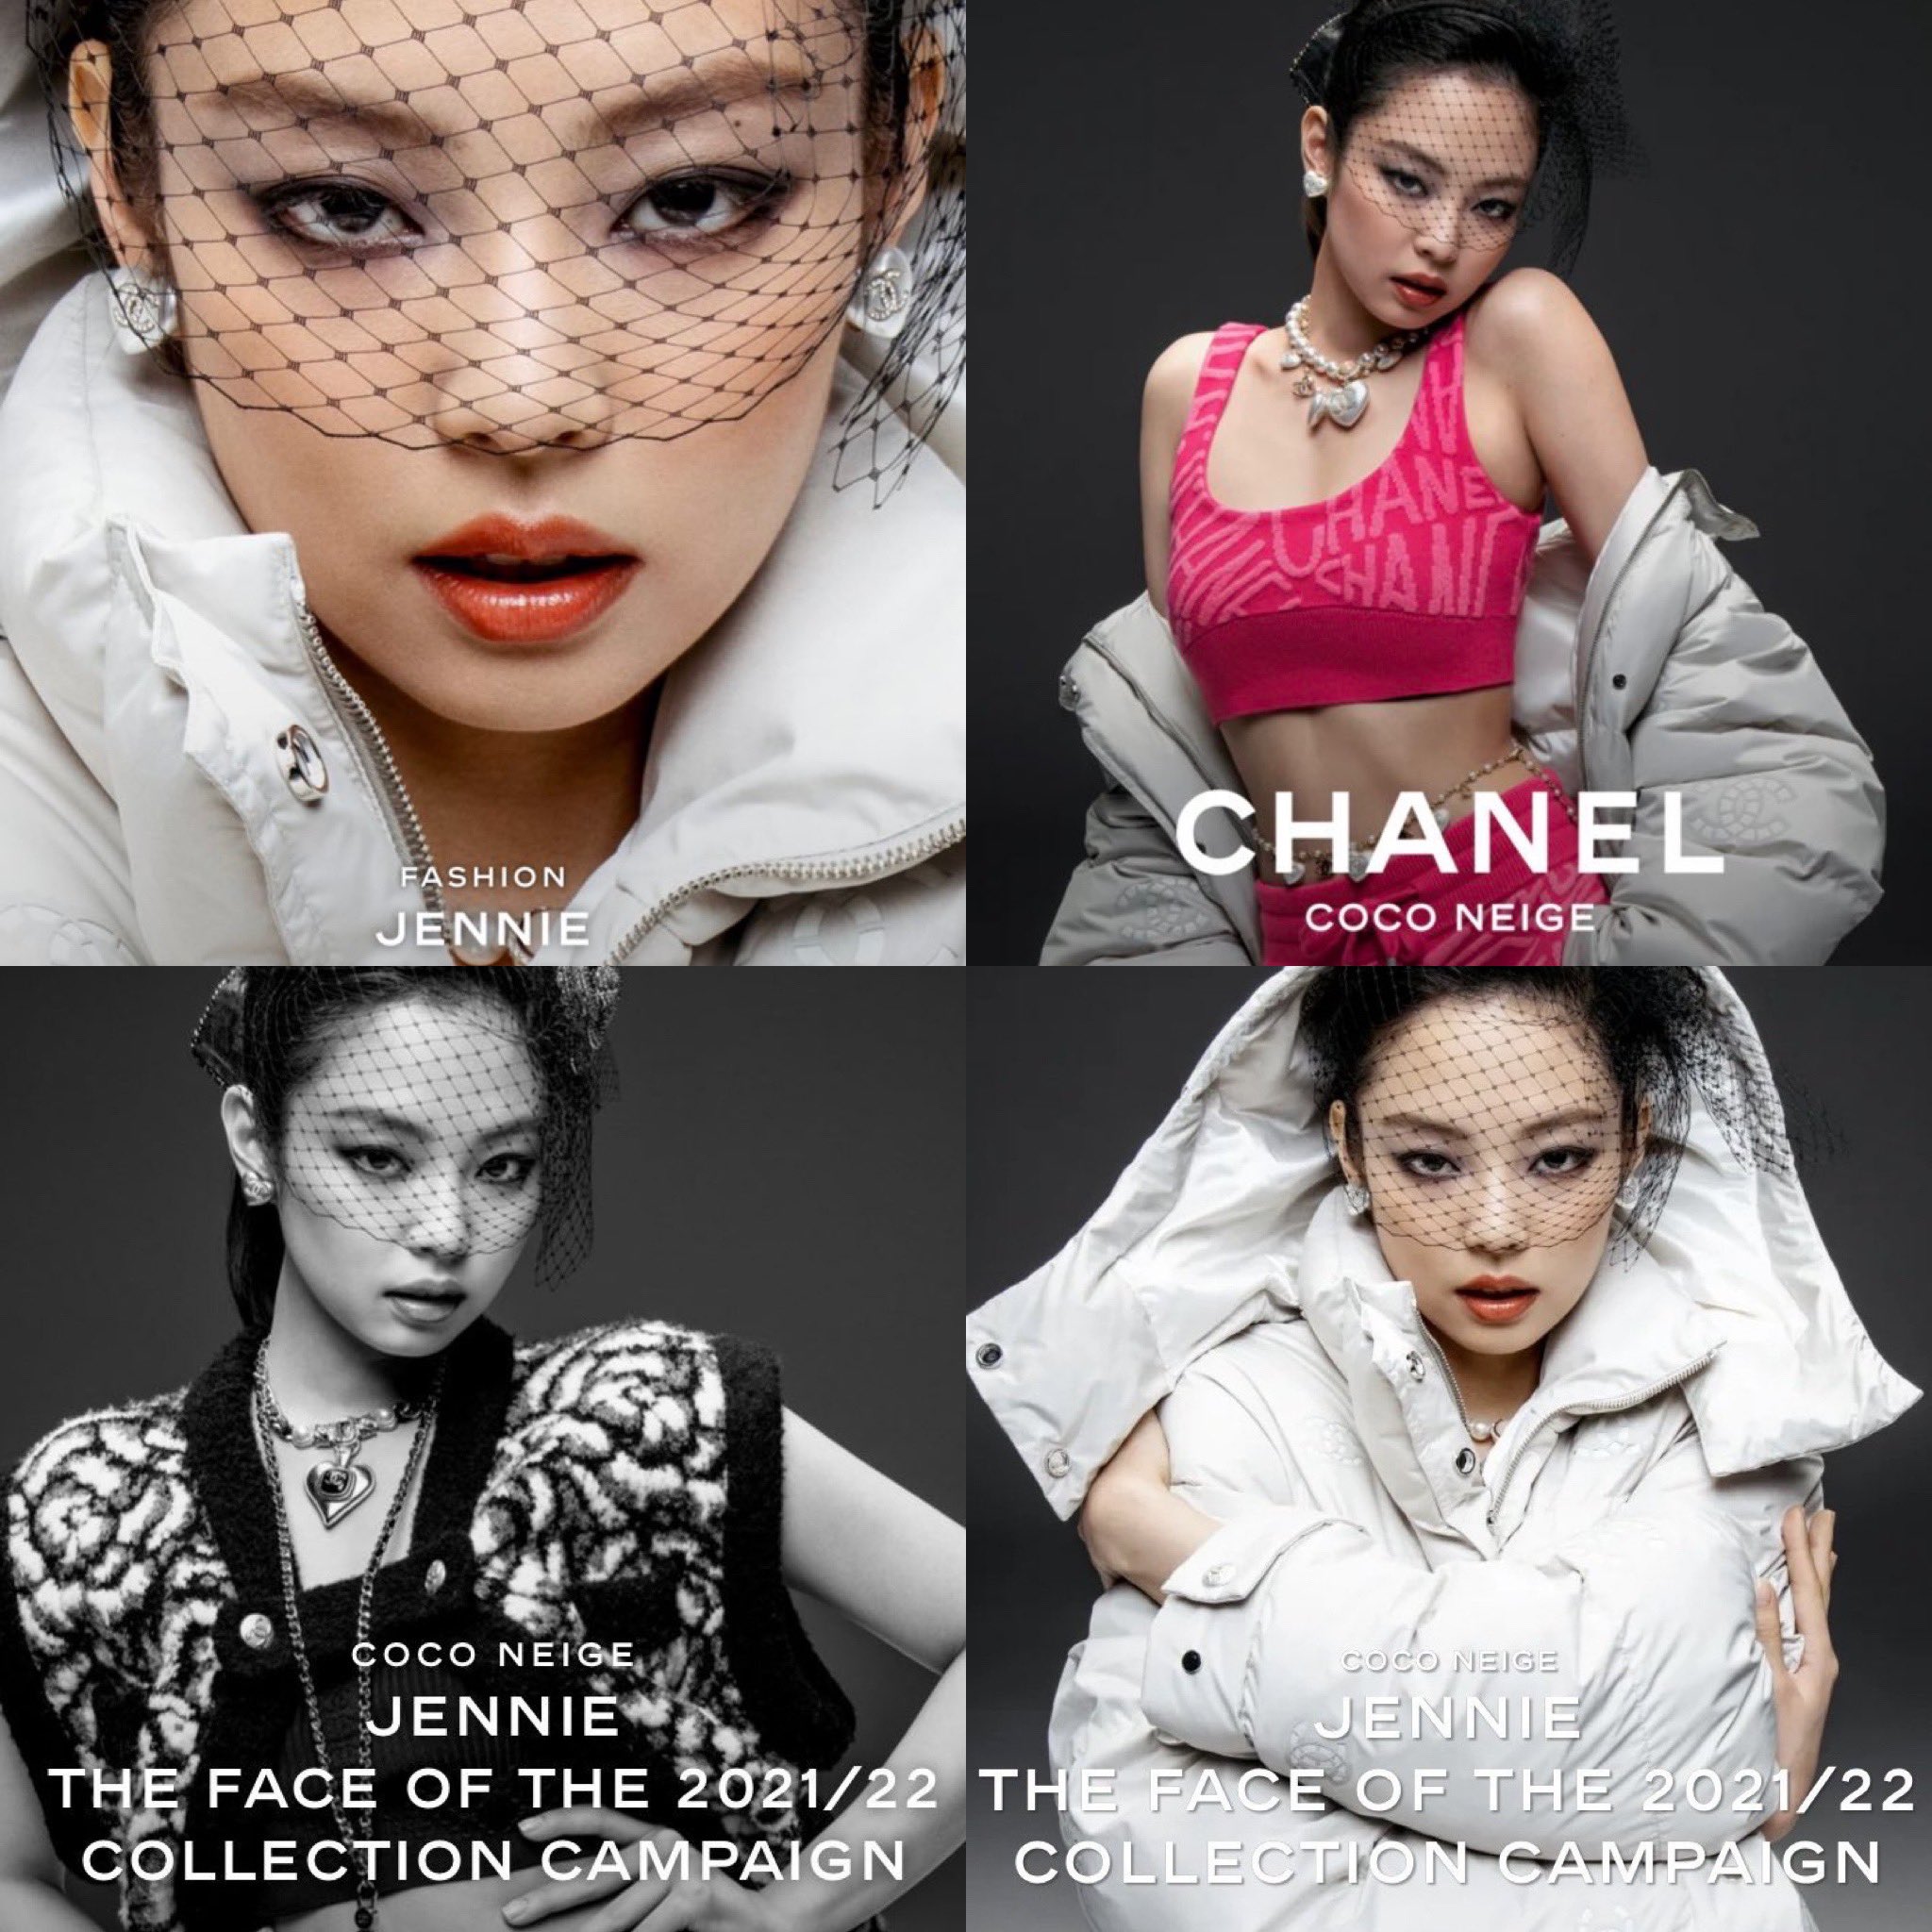 𝐽𝐽 on X: Jennie for the Face of CHANEL COCO NIEGE 2021/22